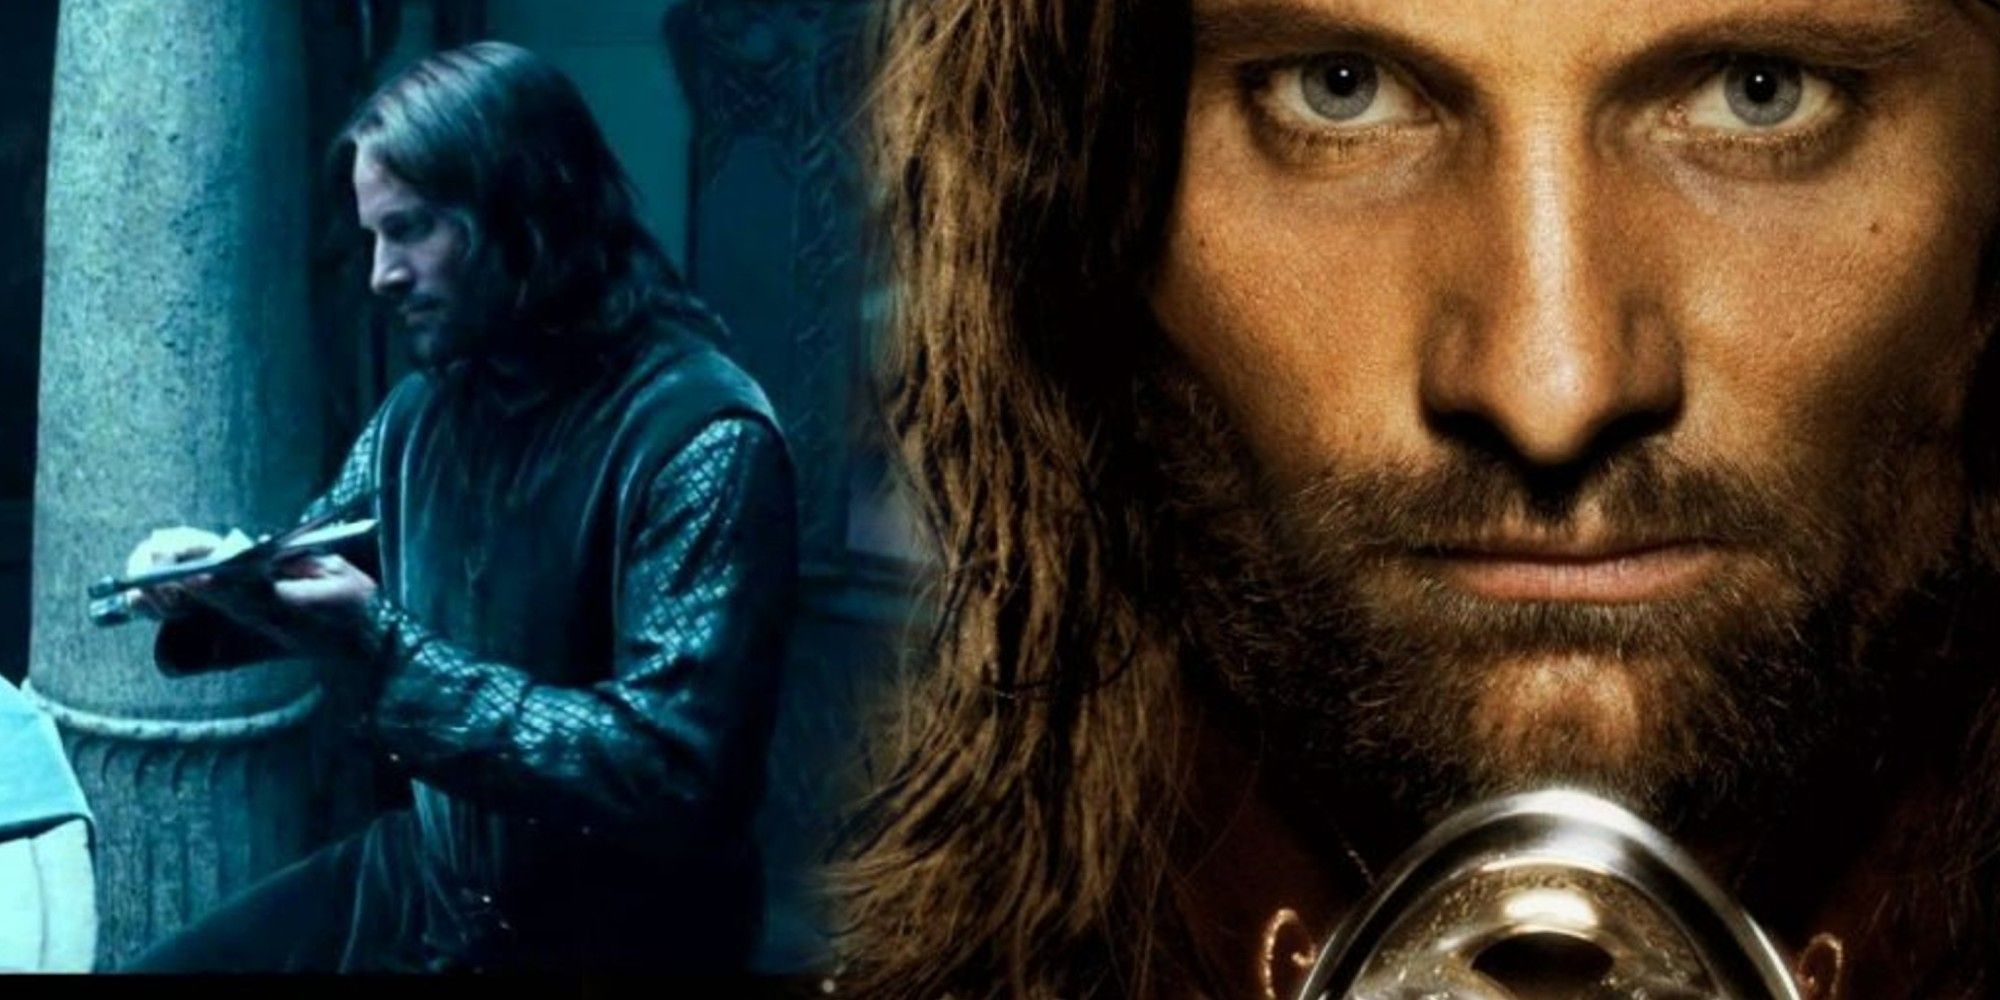 Lord of the Rings Aragorn Leads the Army of the Dead with Prime 1